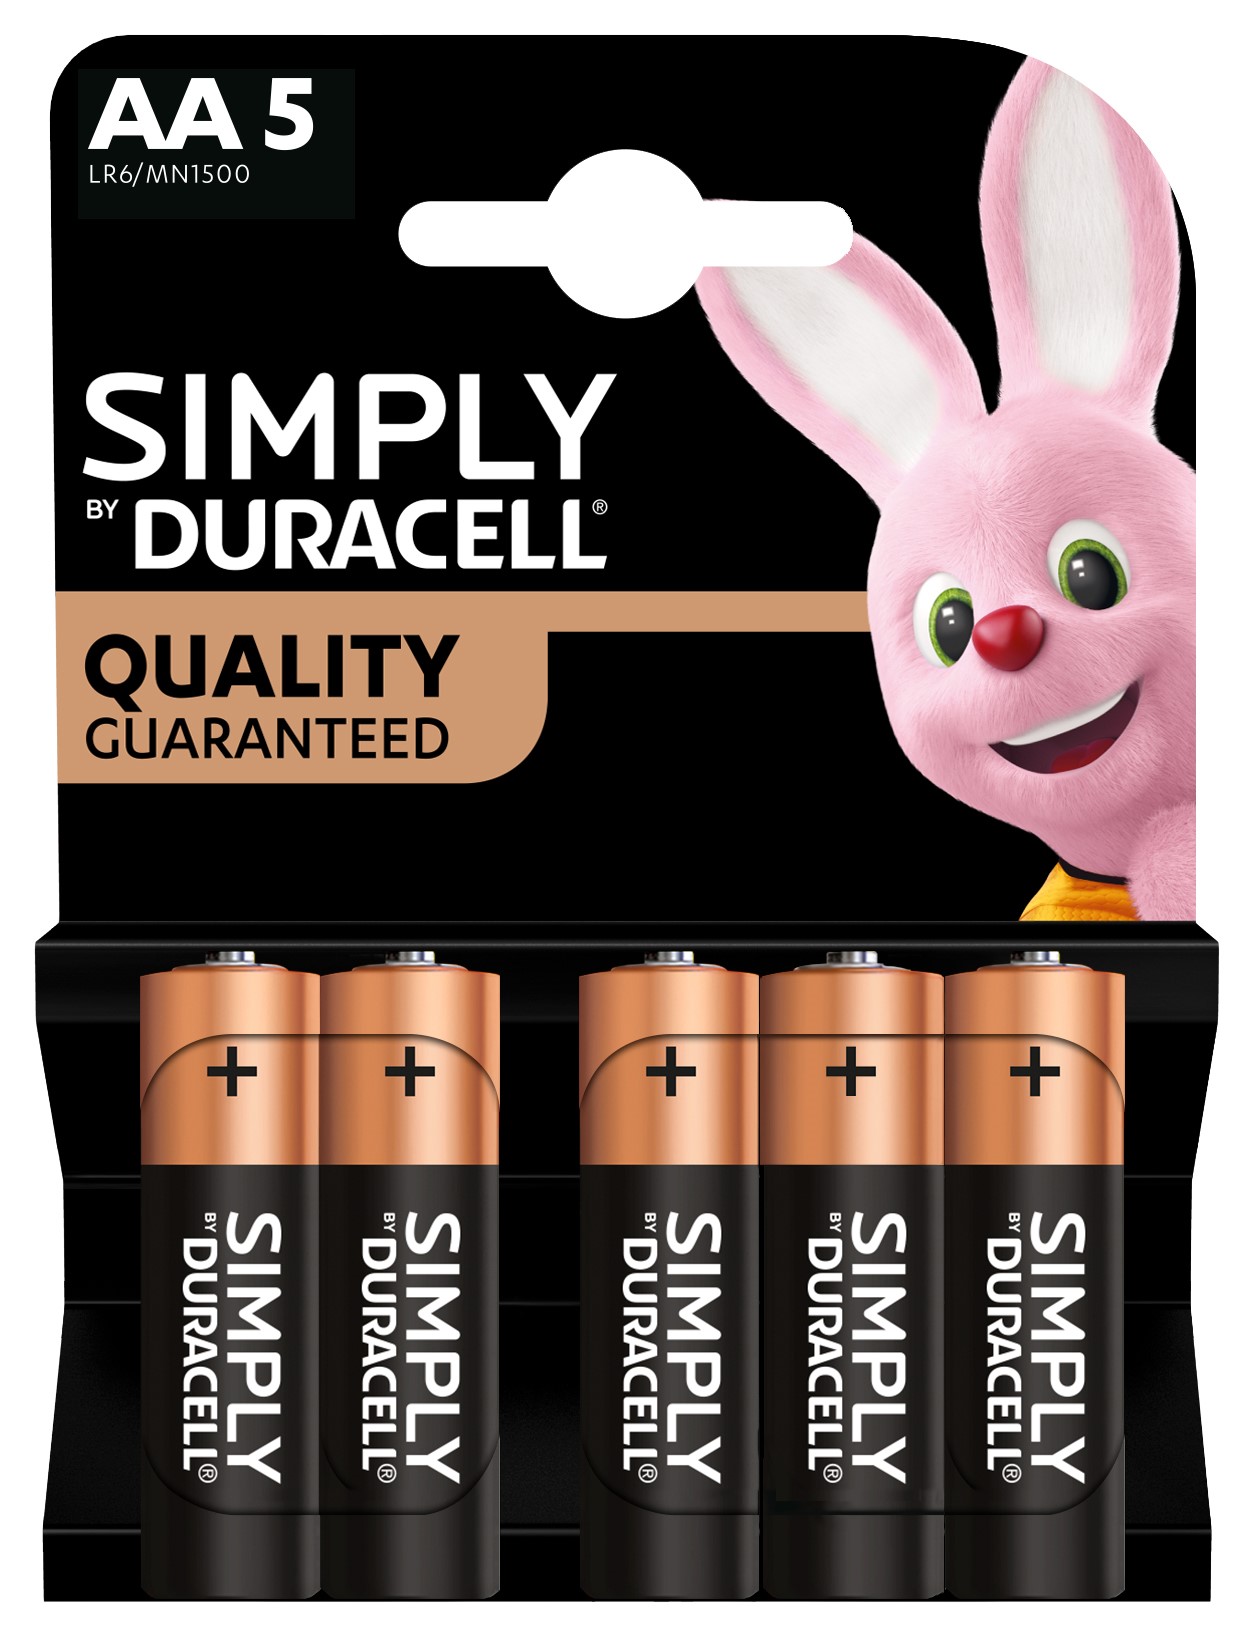 Duracell Μπαταρίες Αλκαλικές Simply AA 5τεμ. Duracell